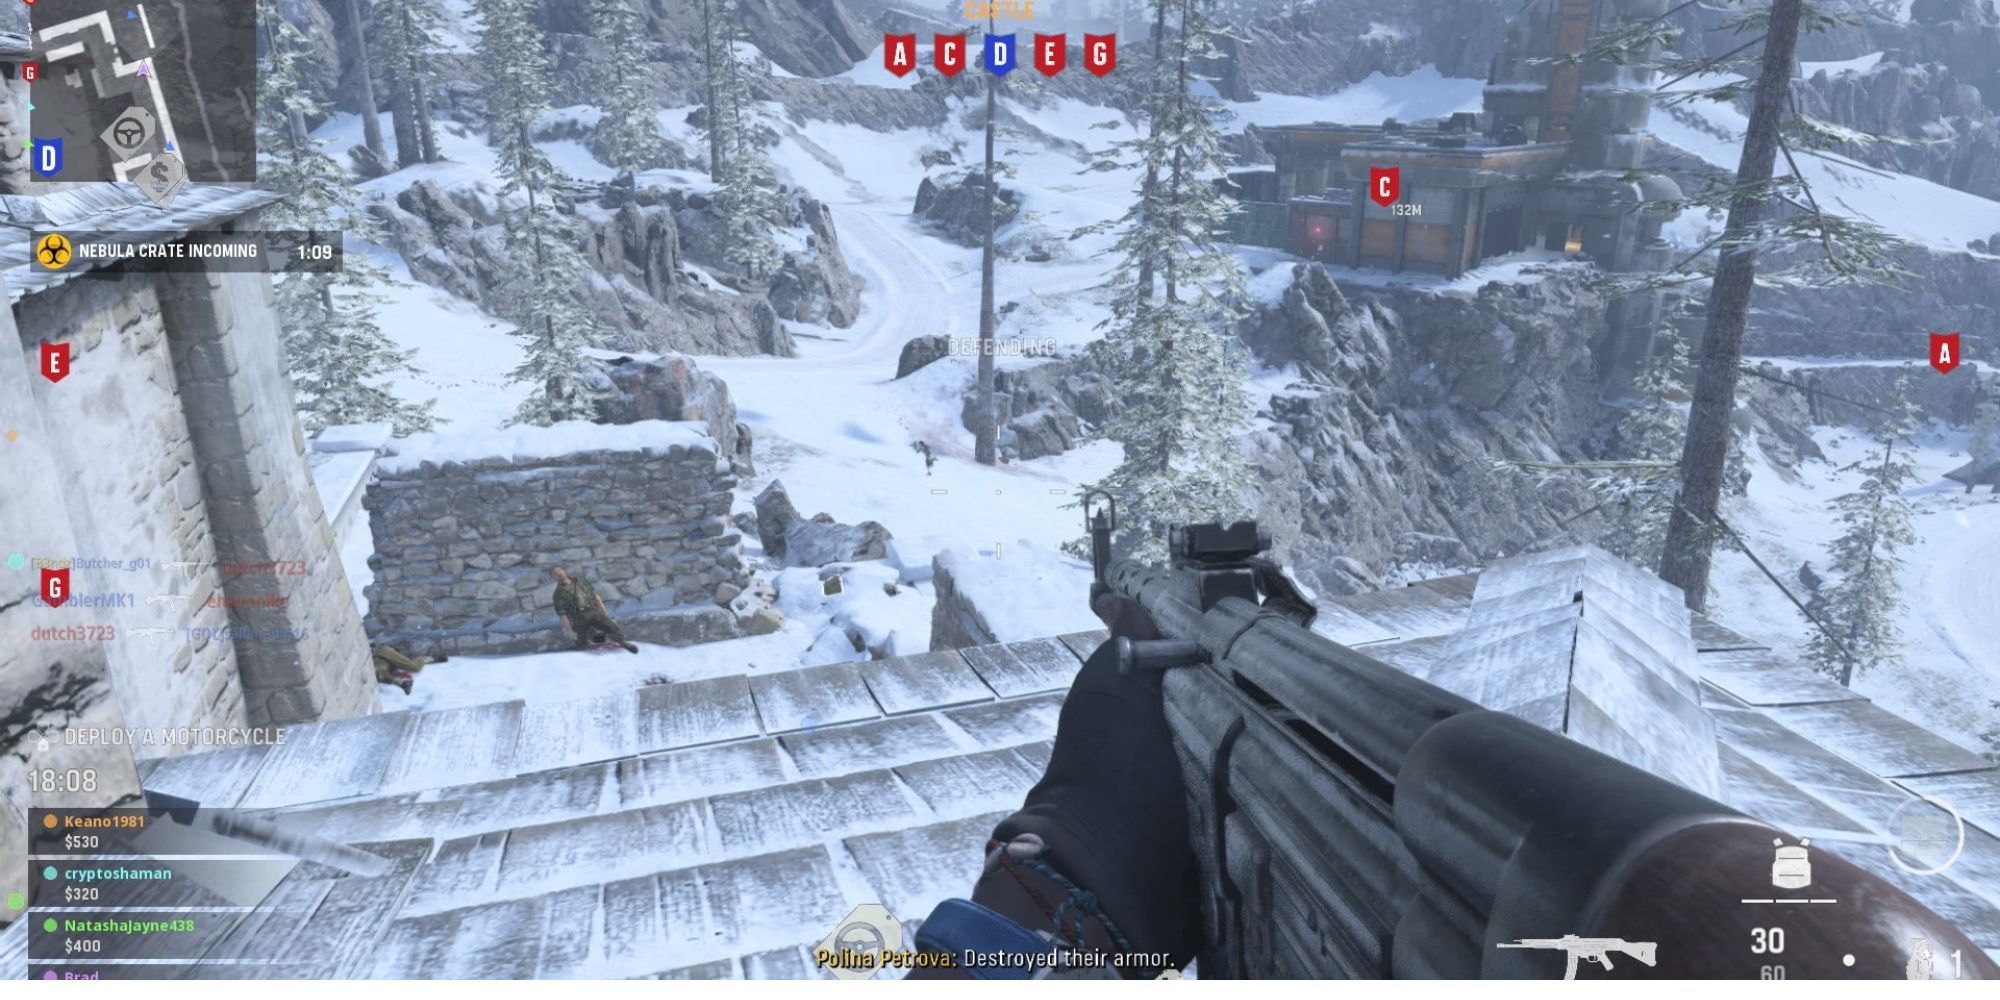 A player perched on a rooftop scoping out the area on Call of Duty Vanguard's Arms Race